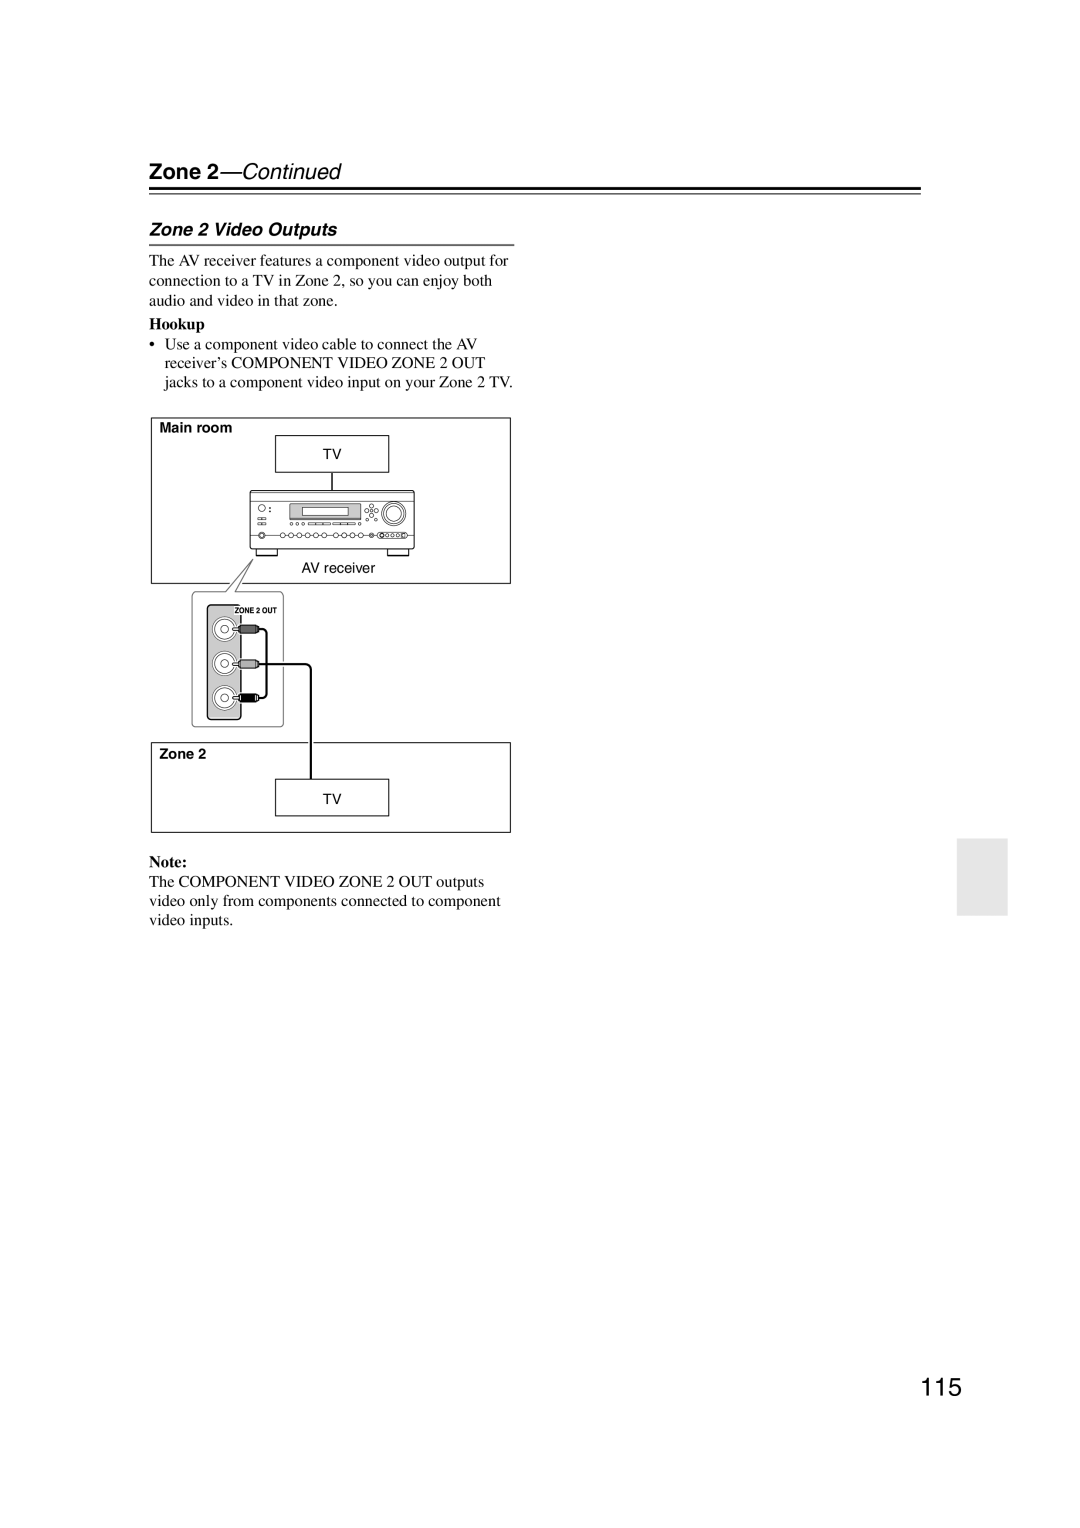 Onkyo DTR-7.9 instruction manual Zone 2 Video Outputs, Zone 2—Continued, Hookup 